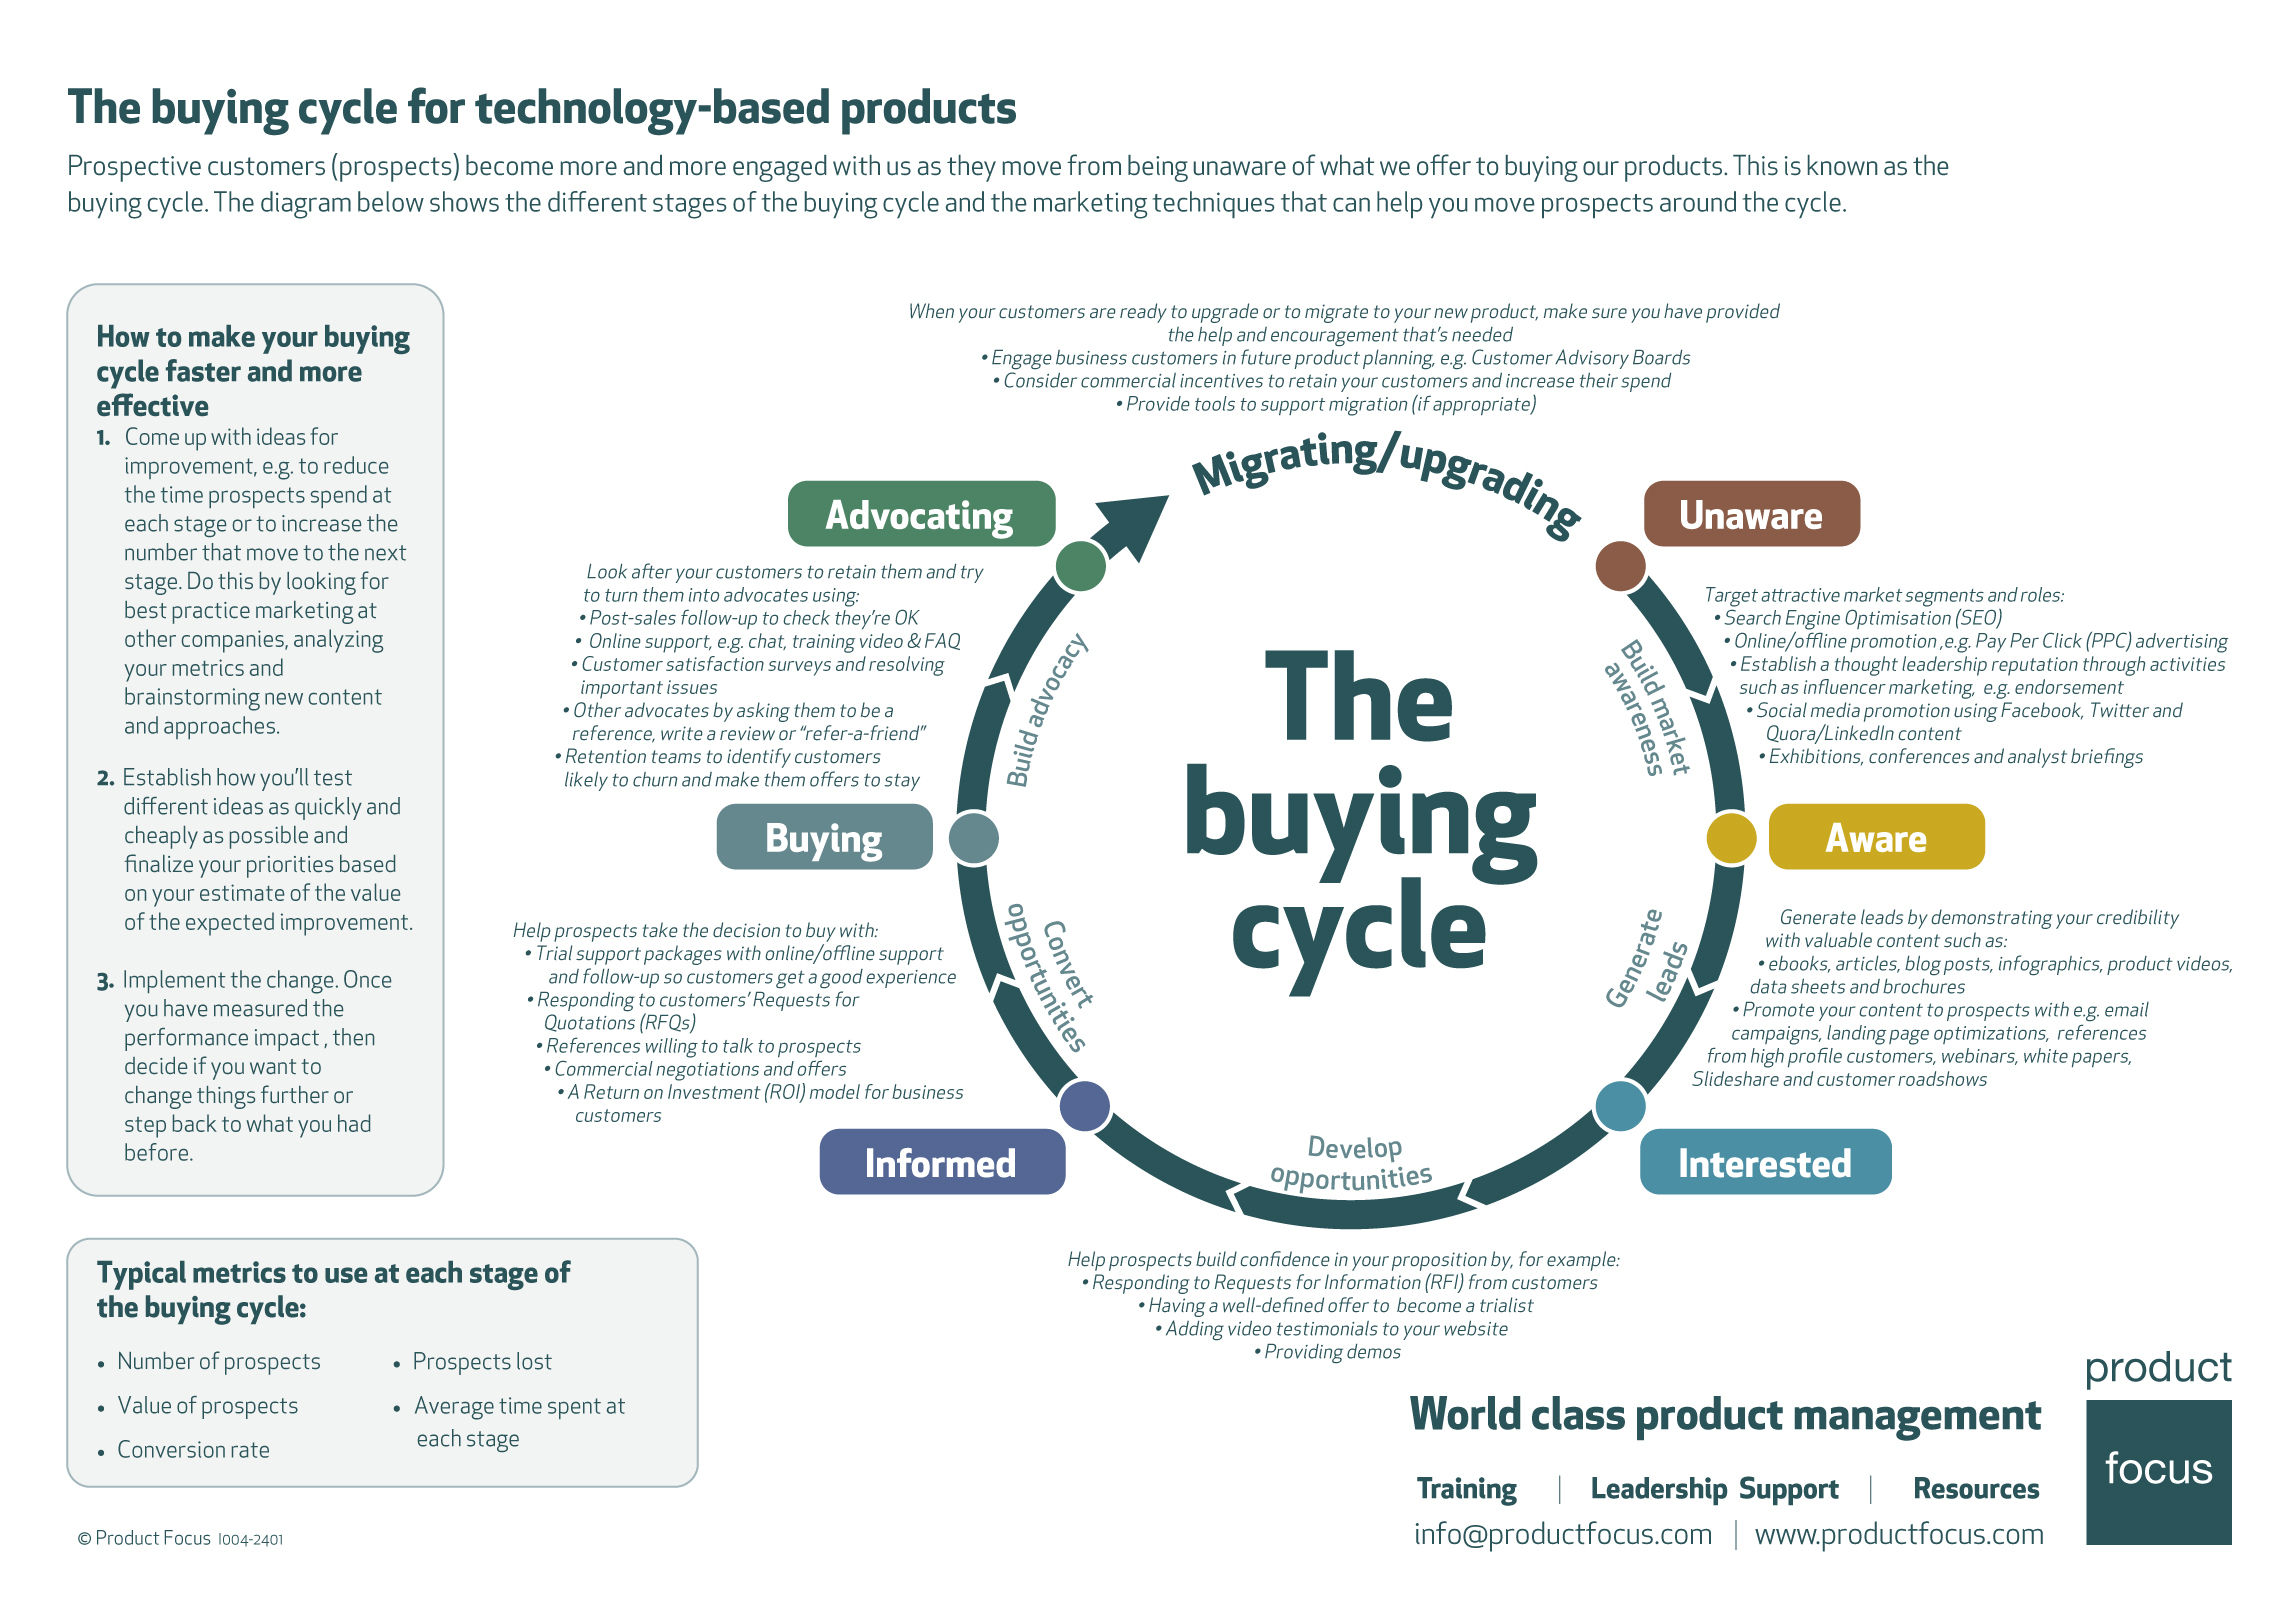 The Buying Cycle infographic